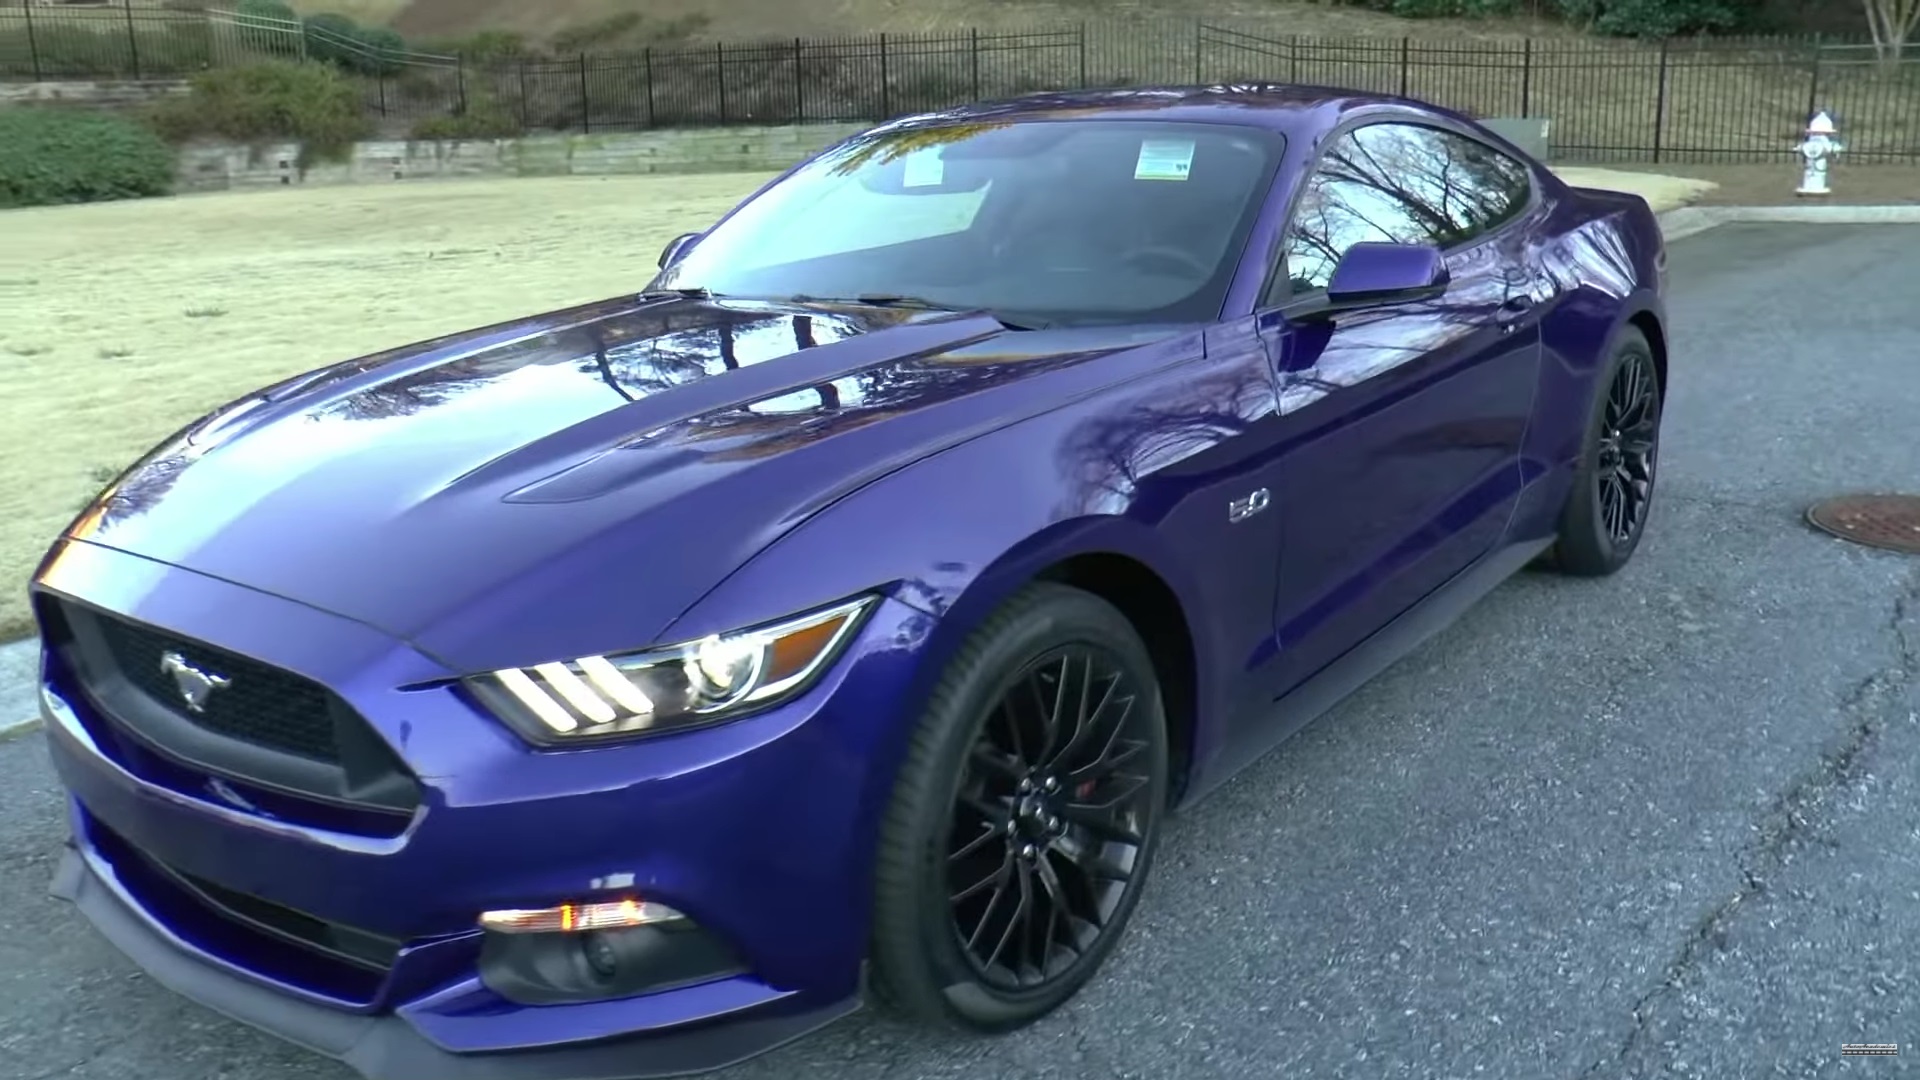 Video: Exhaust Notes - 2015 Ford Mustang GT